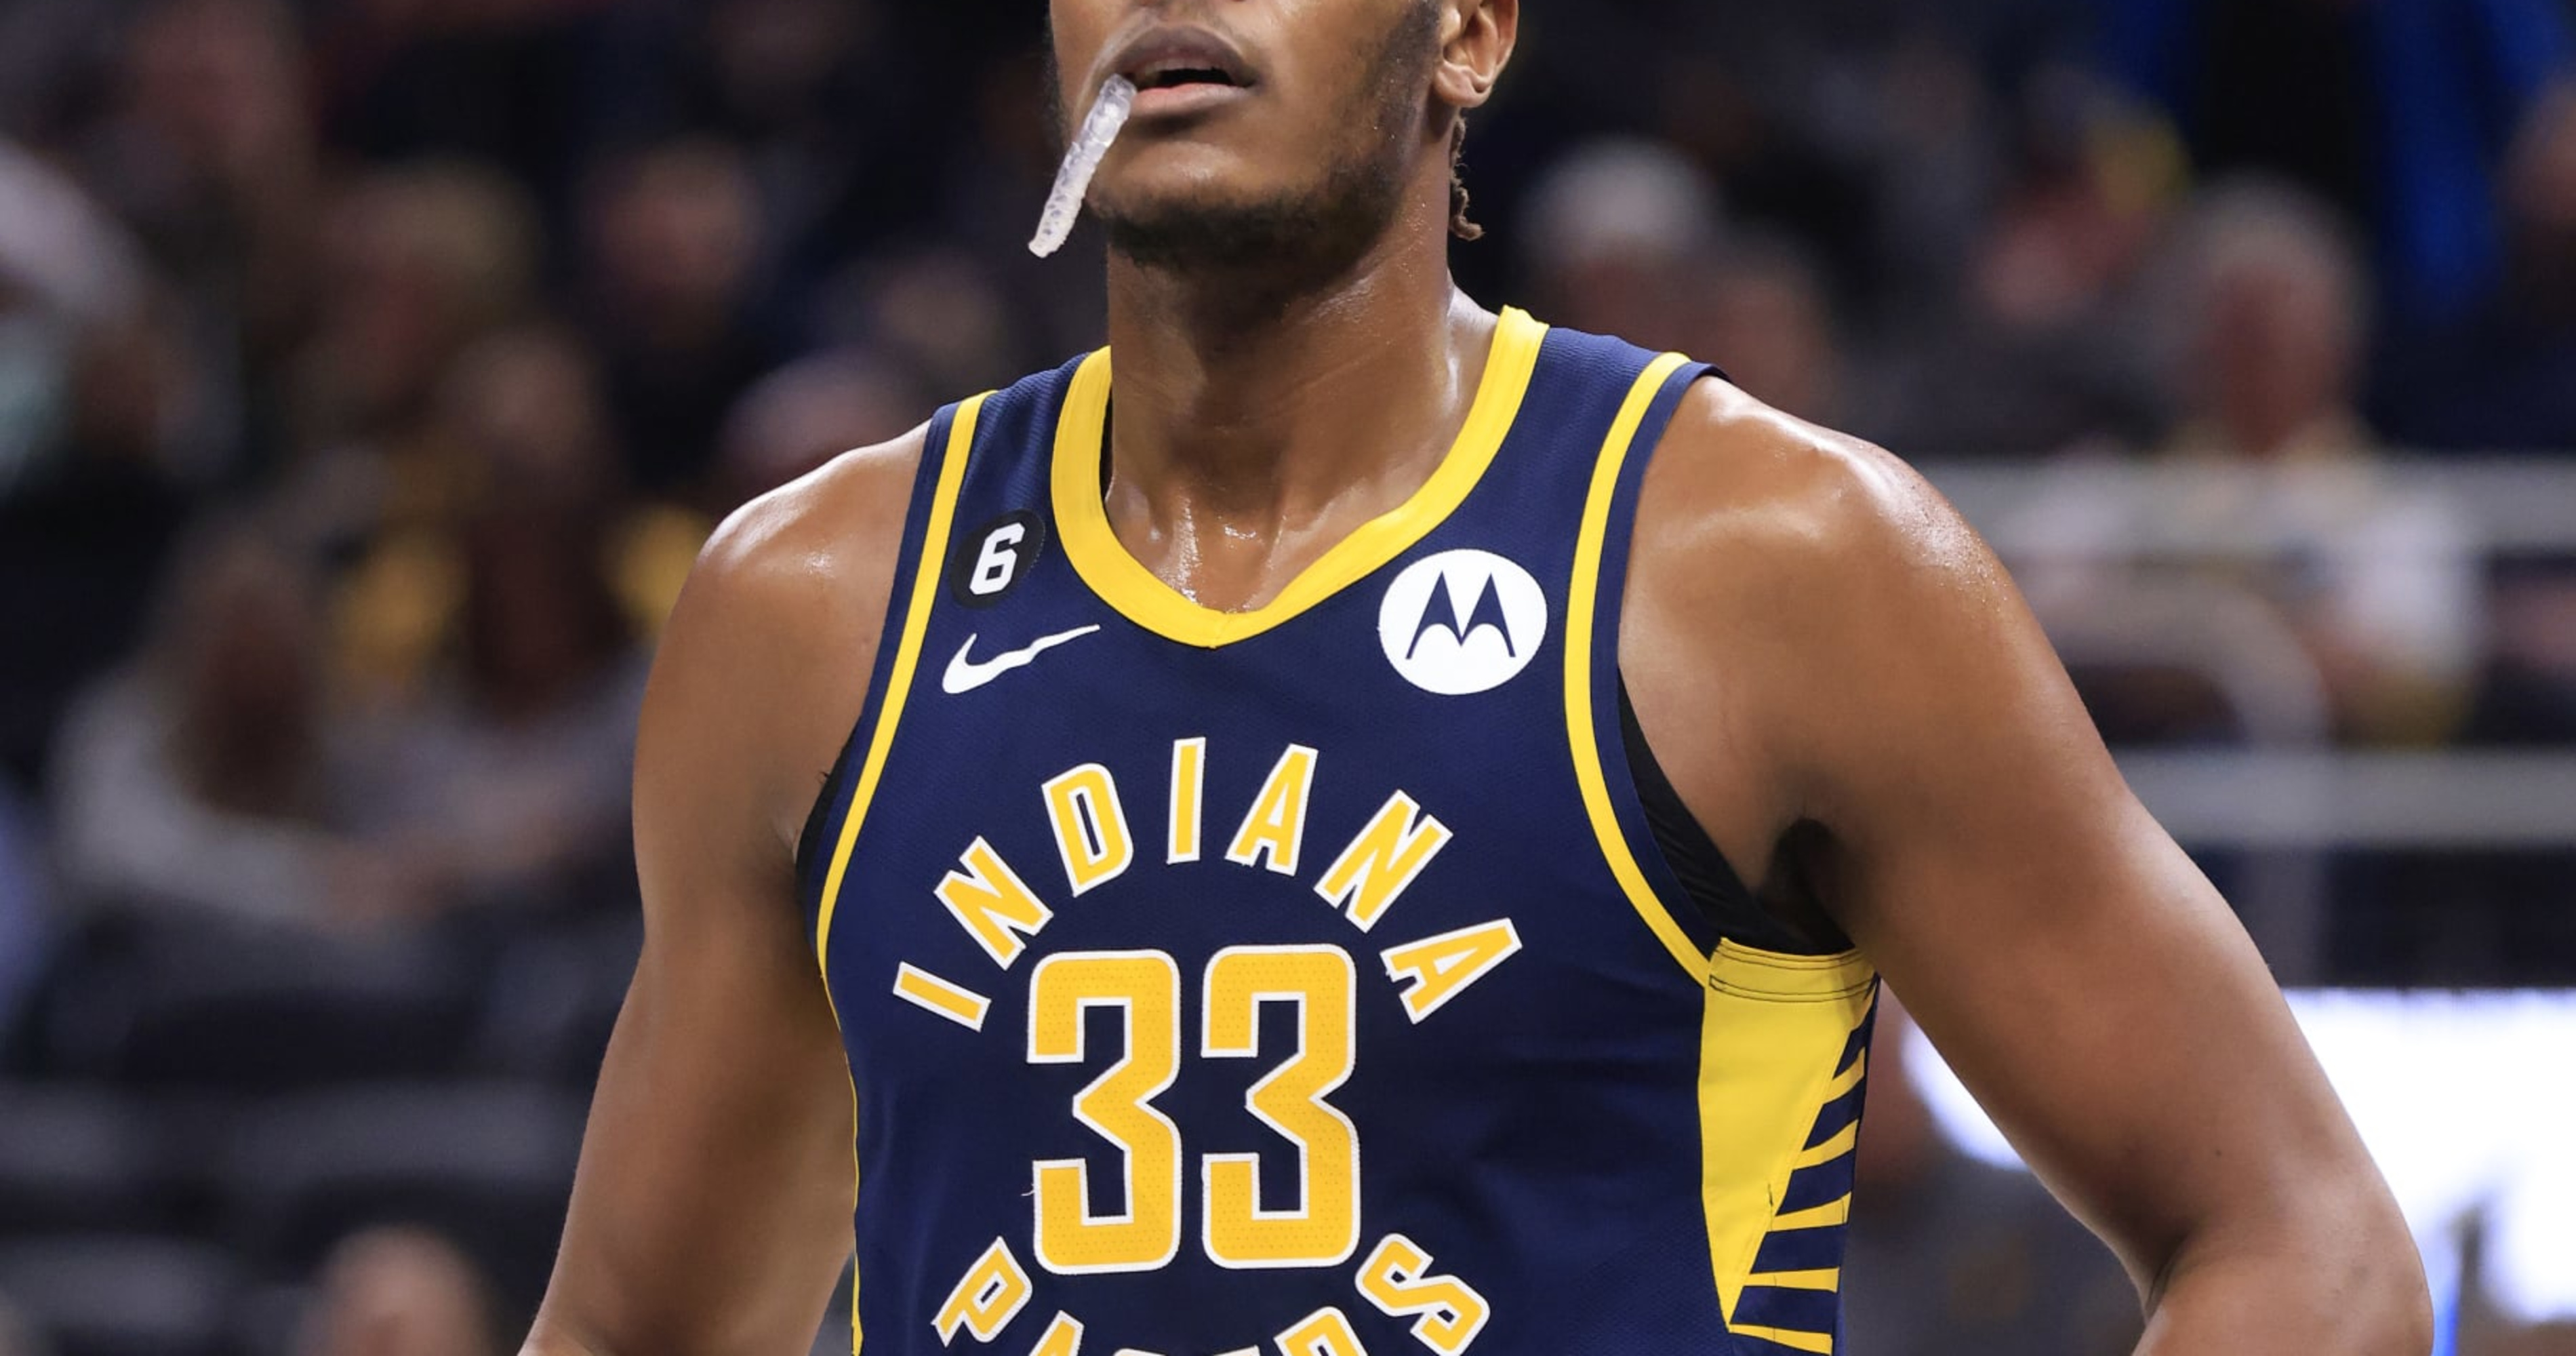 NBA Rumors: Myles Turner, Jordan Clarkson Have Turned Down Contract Extension Of..